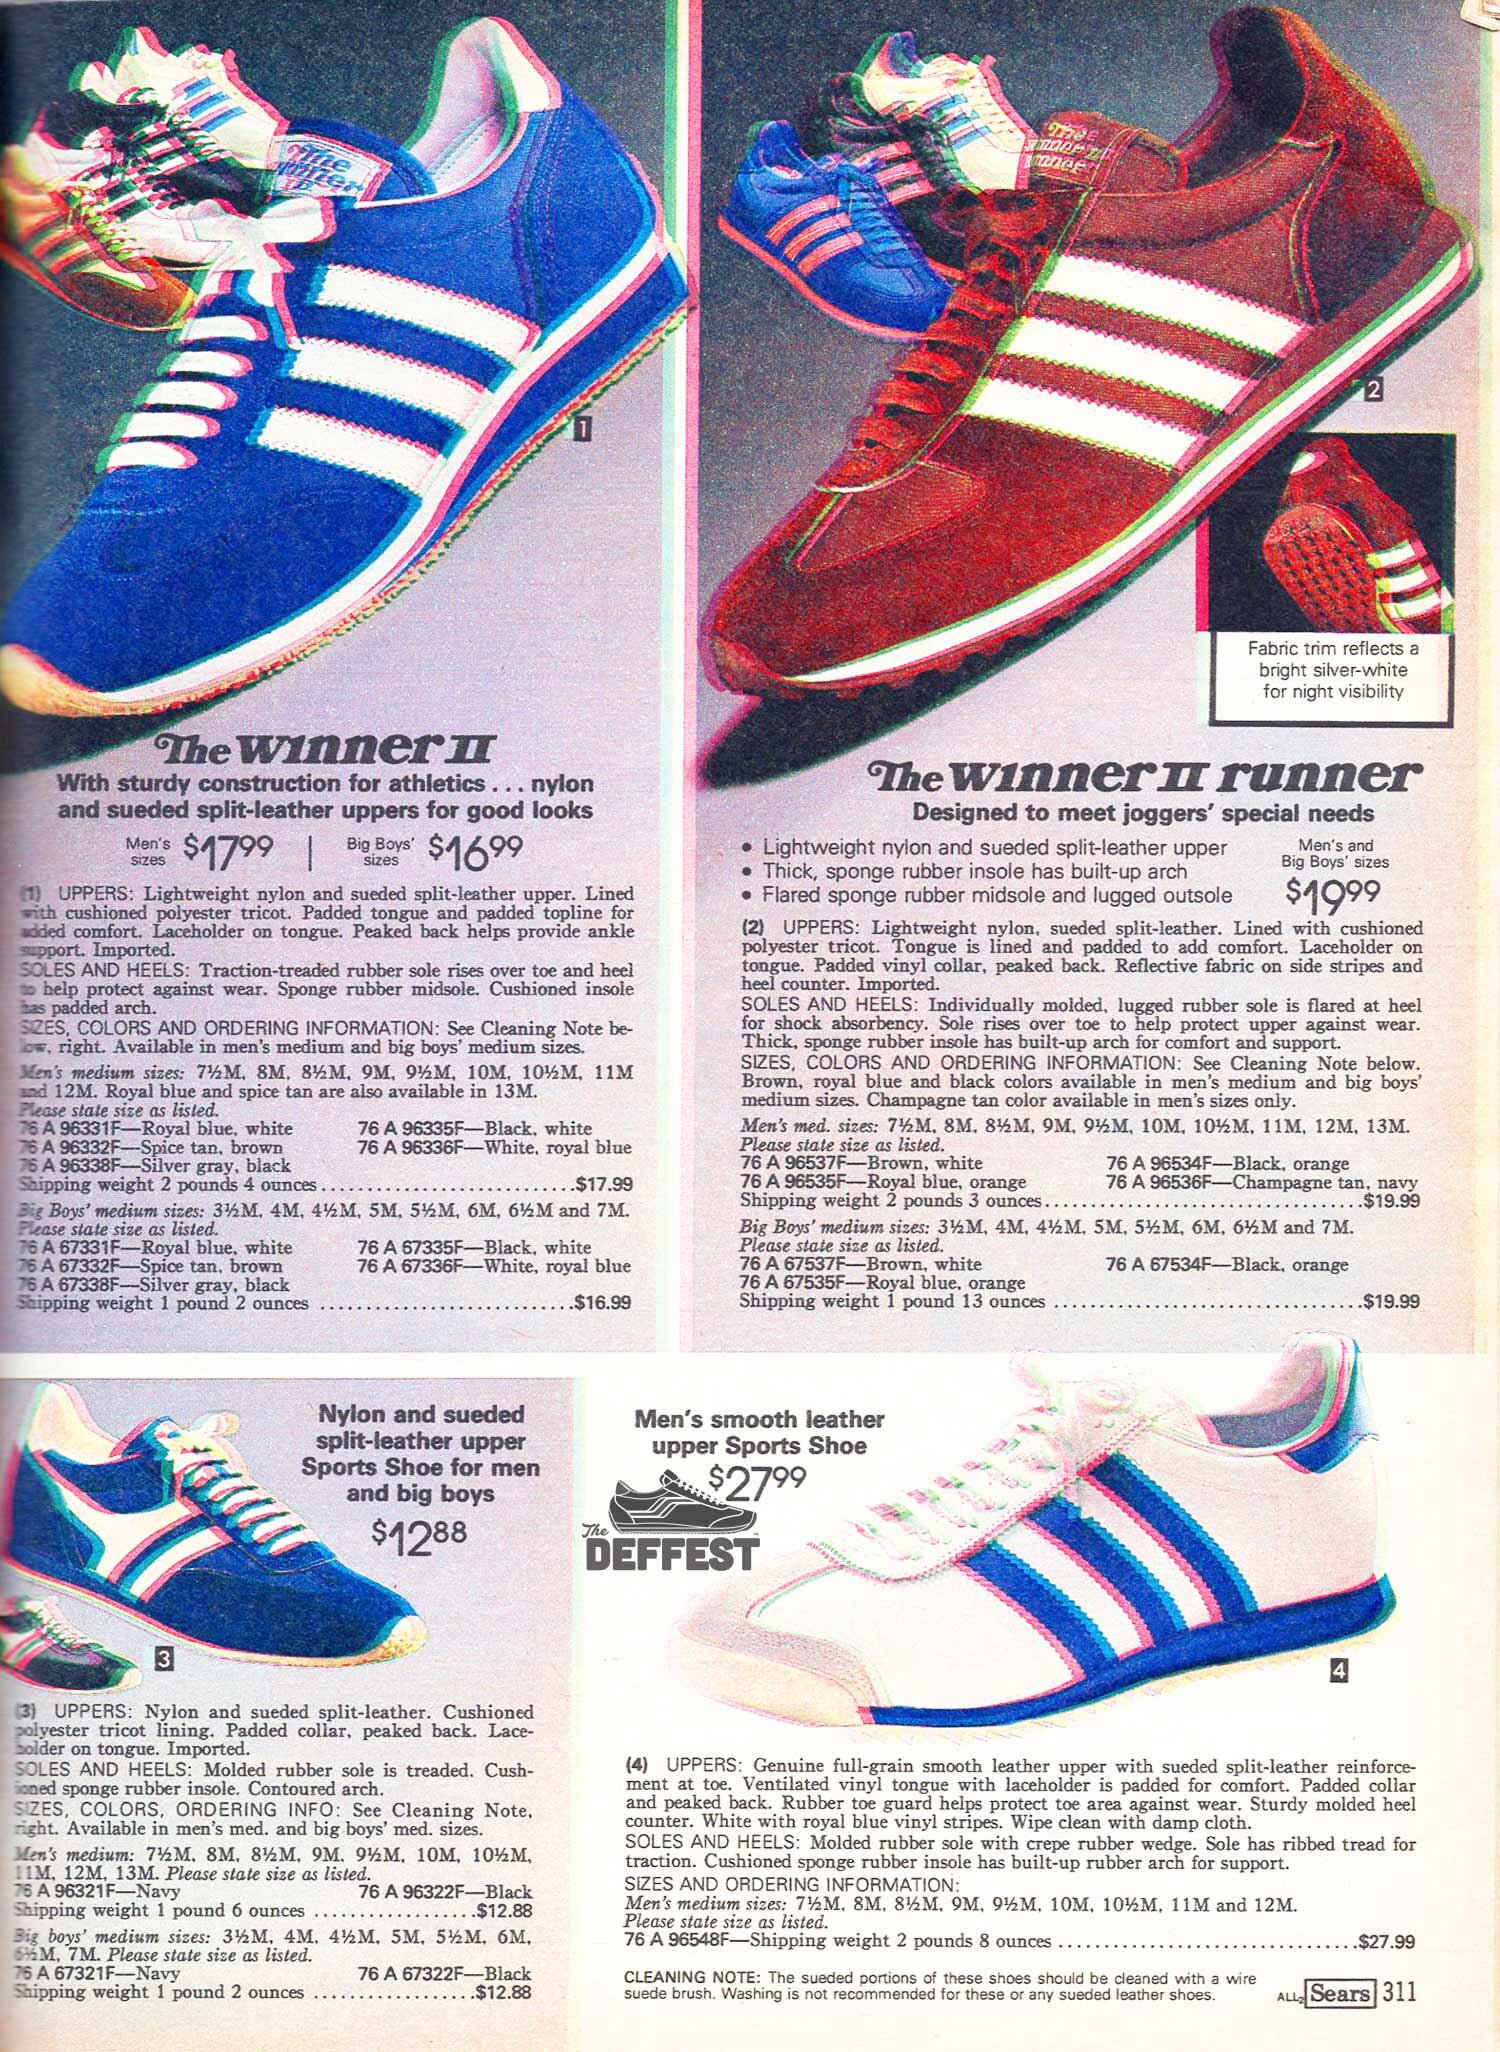 The Deffest®. A vintage and retro sneaker blog. — adidas 1979 TRX  Competition vintage sneaker ad